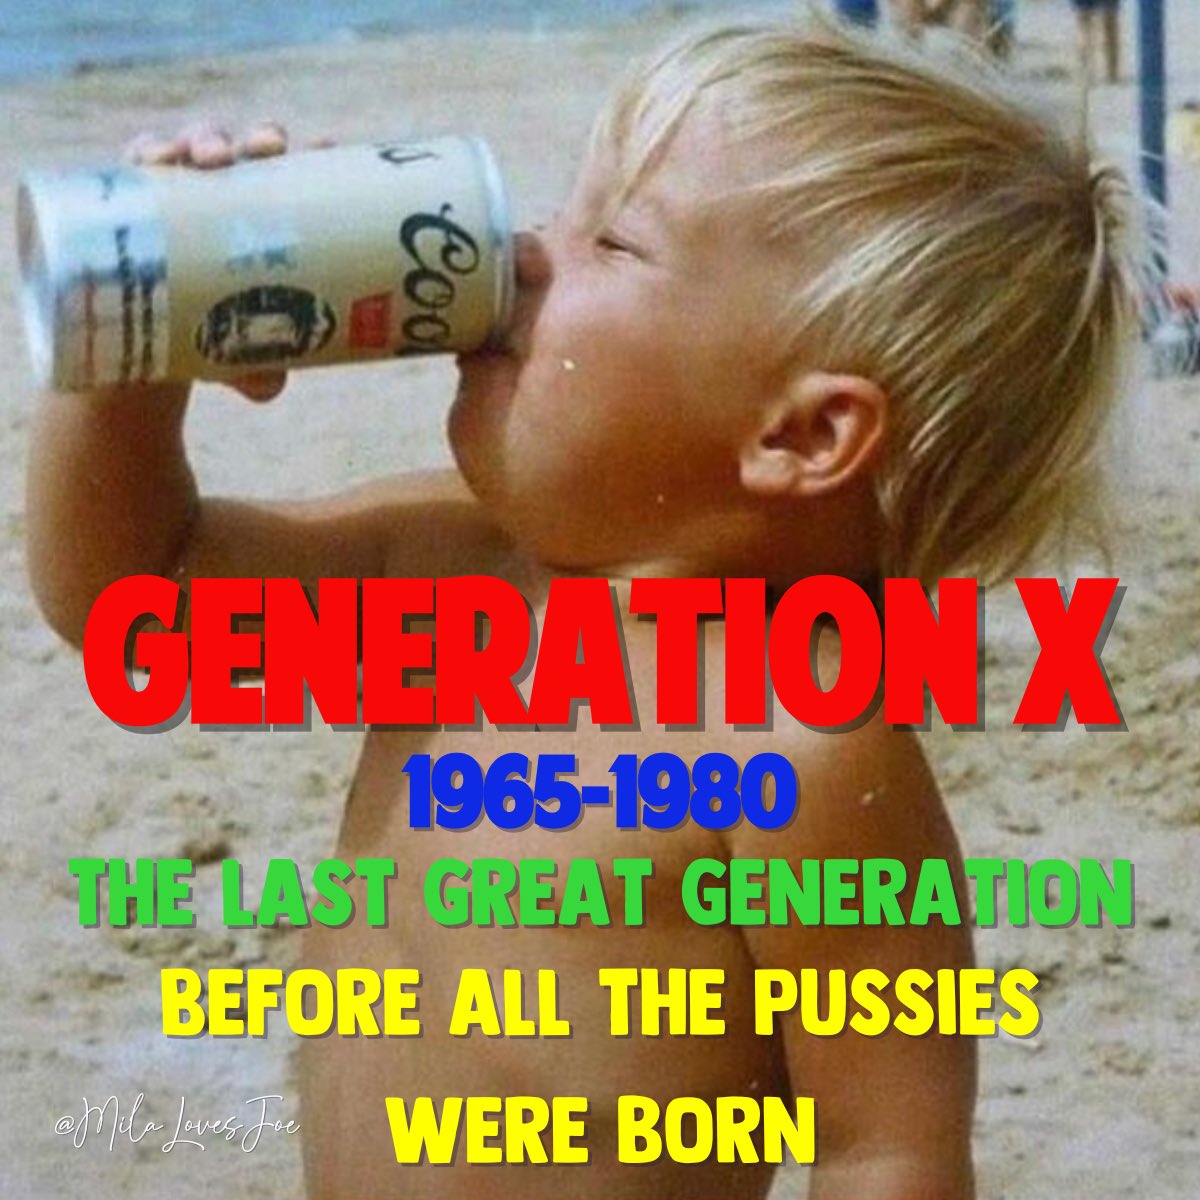 Gen X and proud of it. Who's with me?